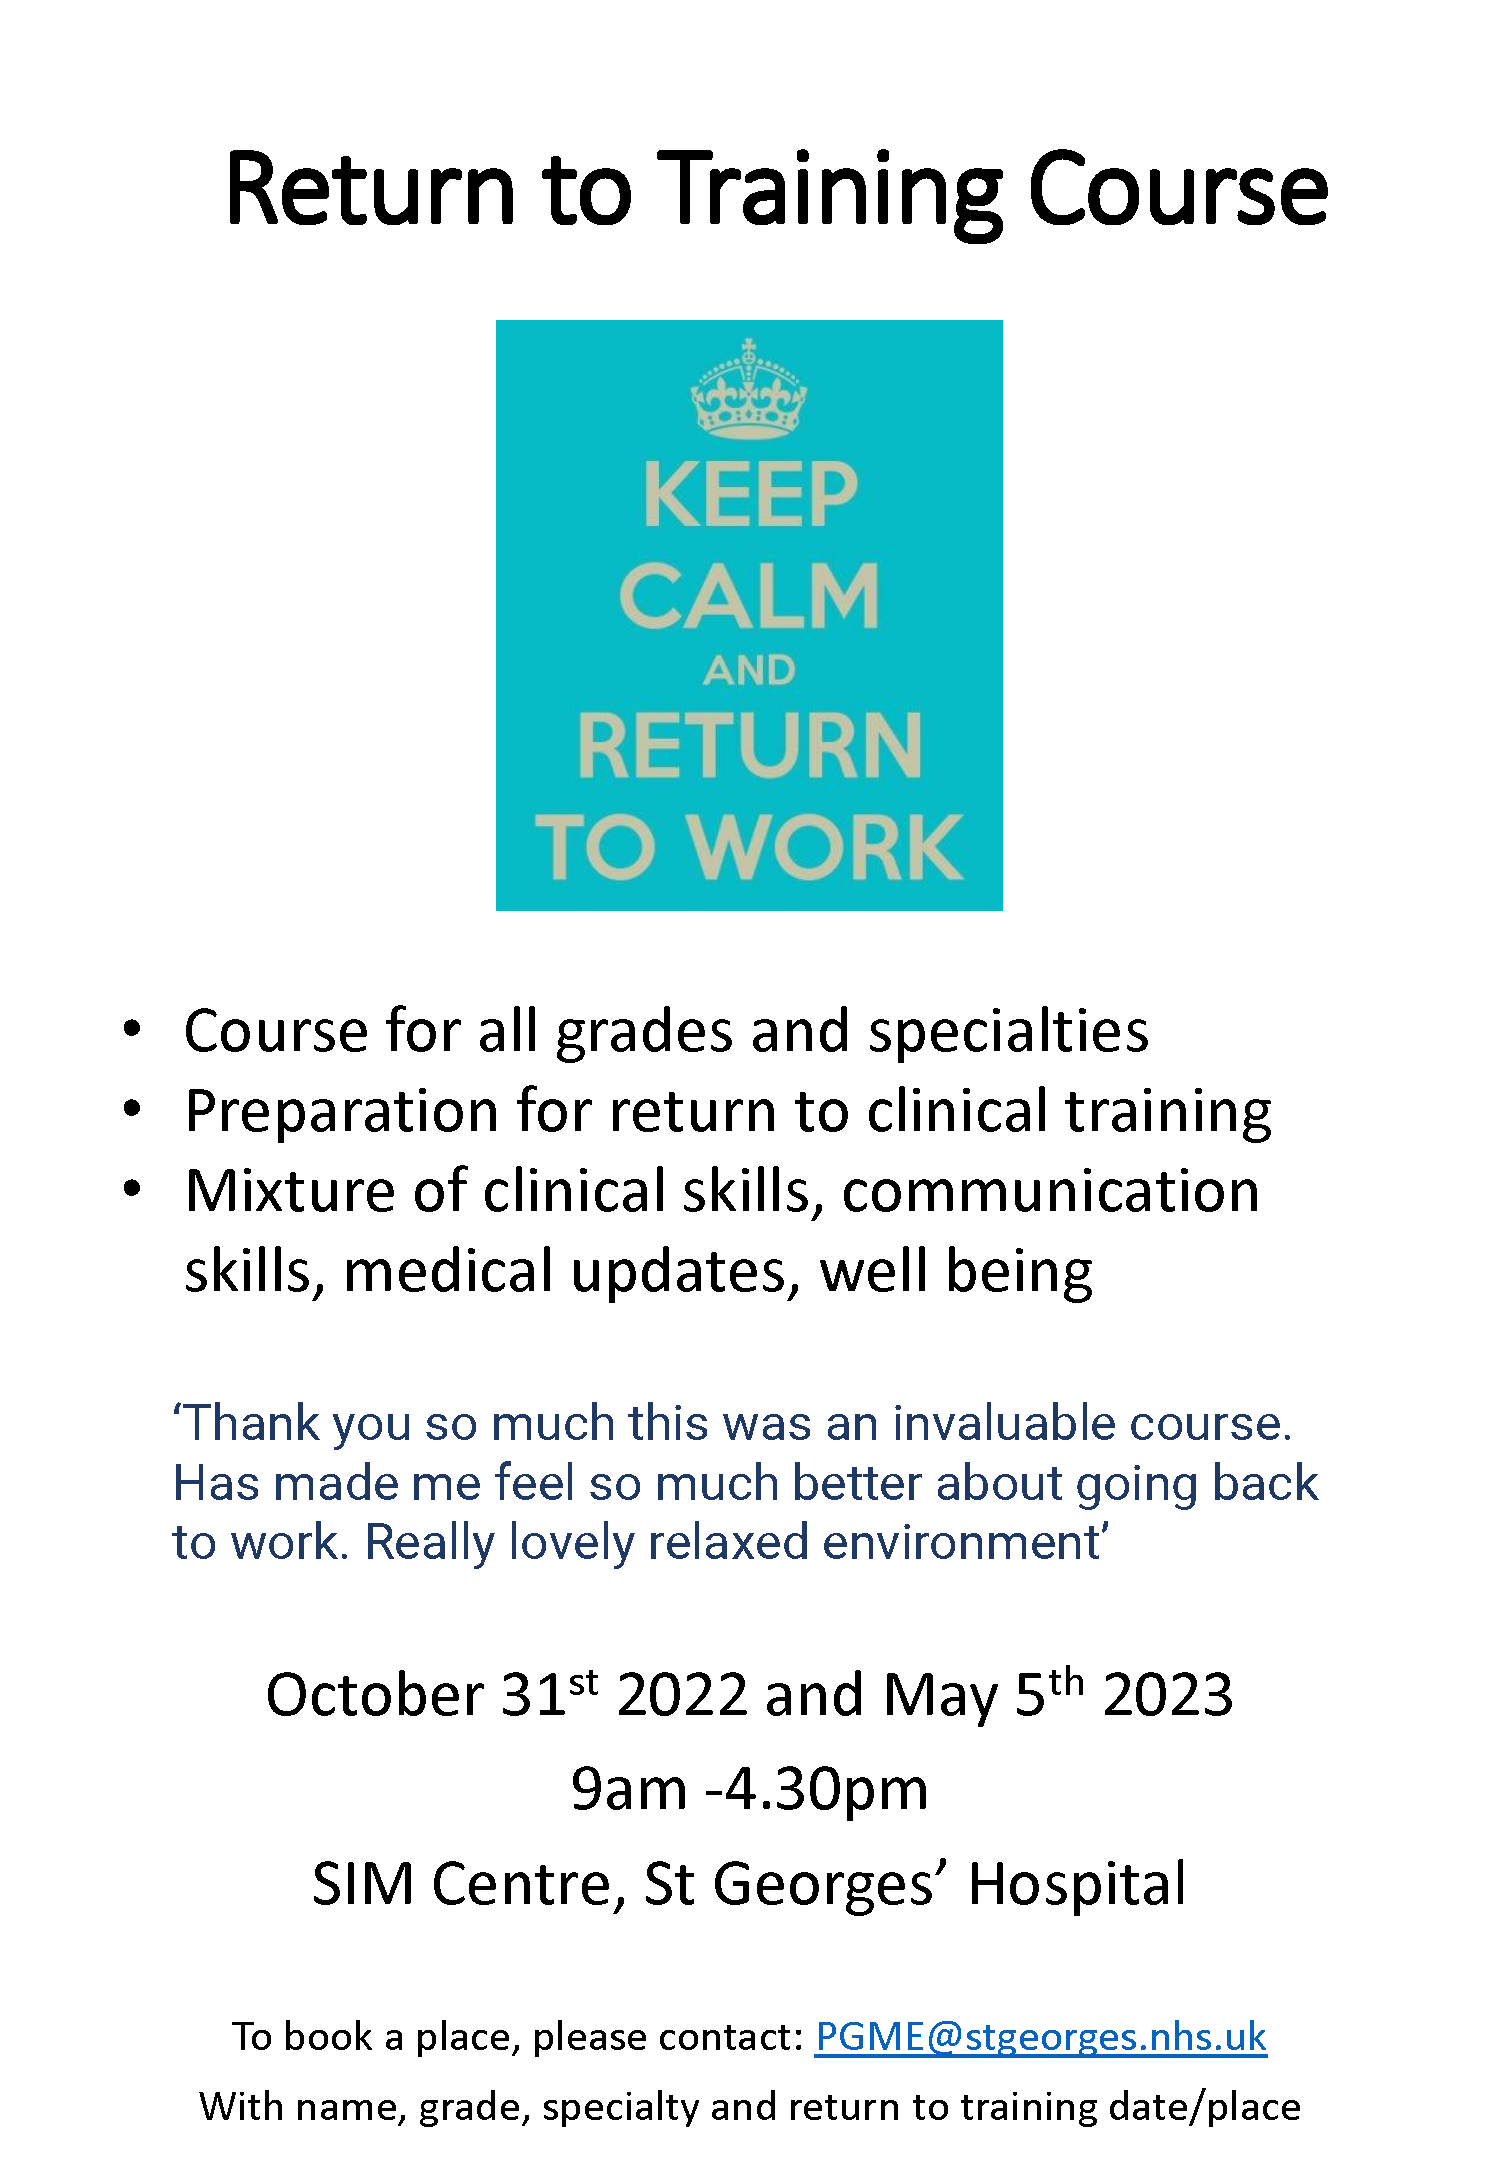 return_to_training_course_poster.png